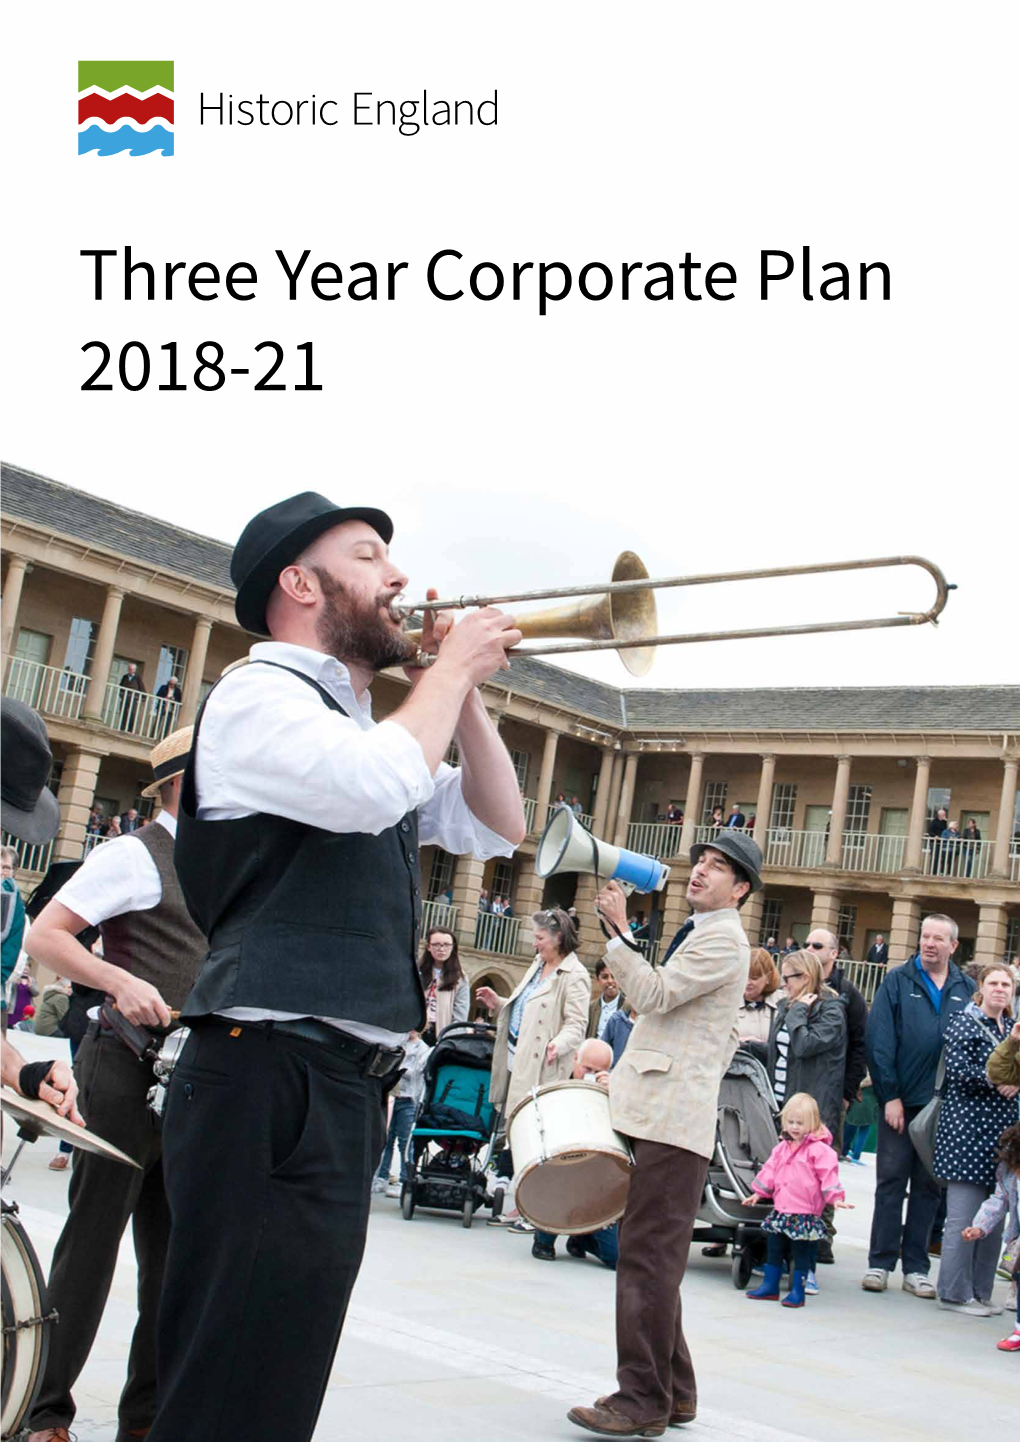 Three Year Corporate Plan 2018-21 Contents